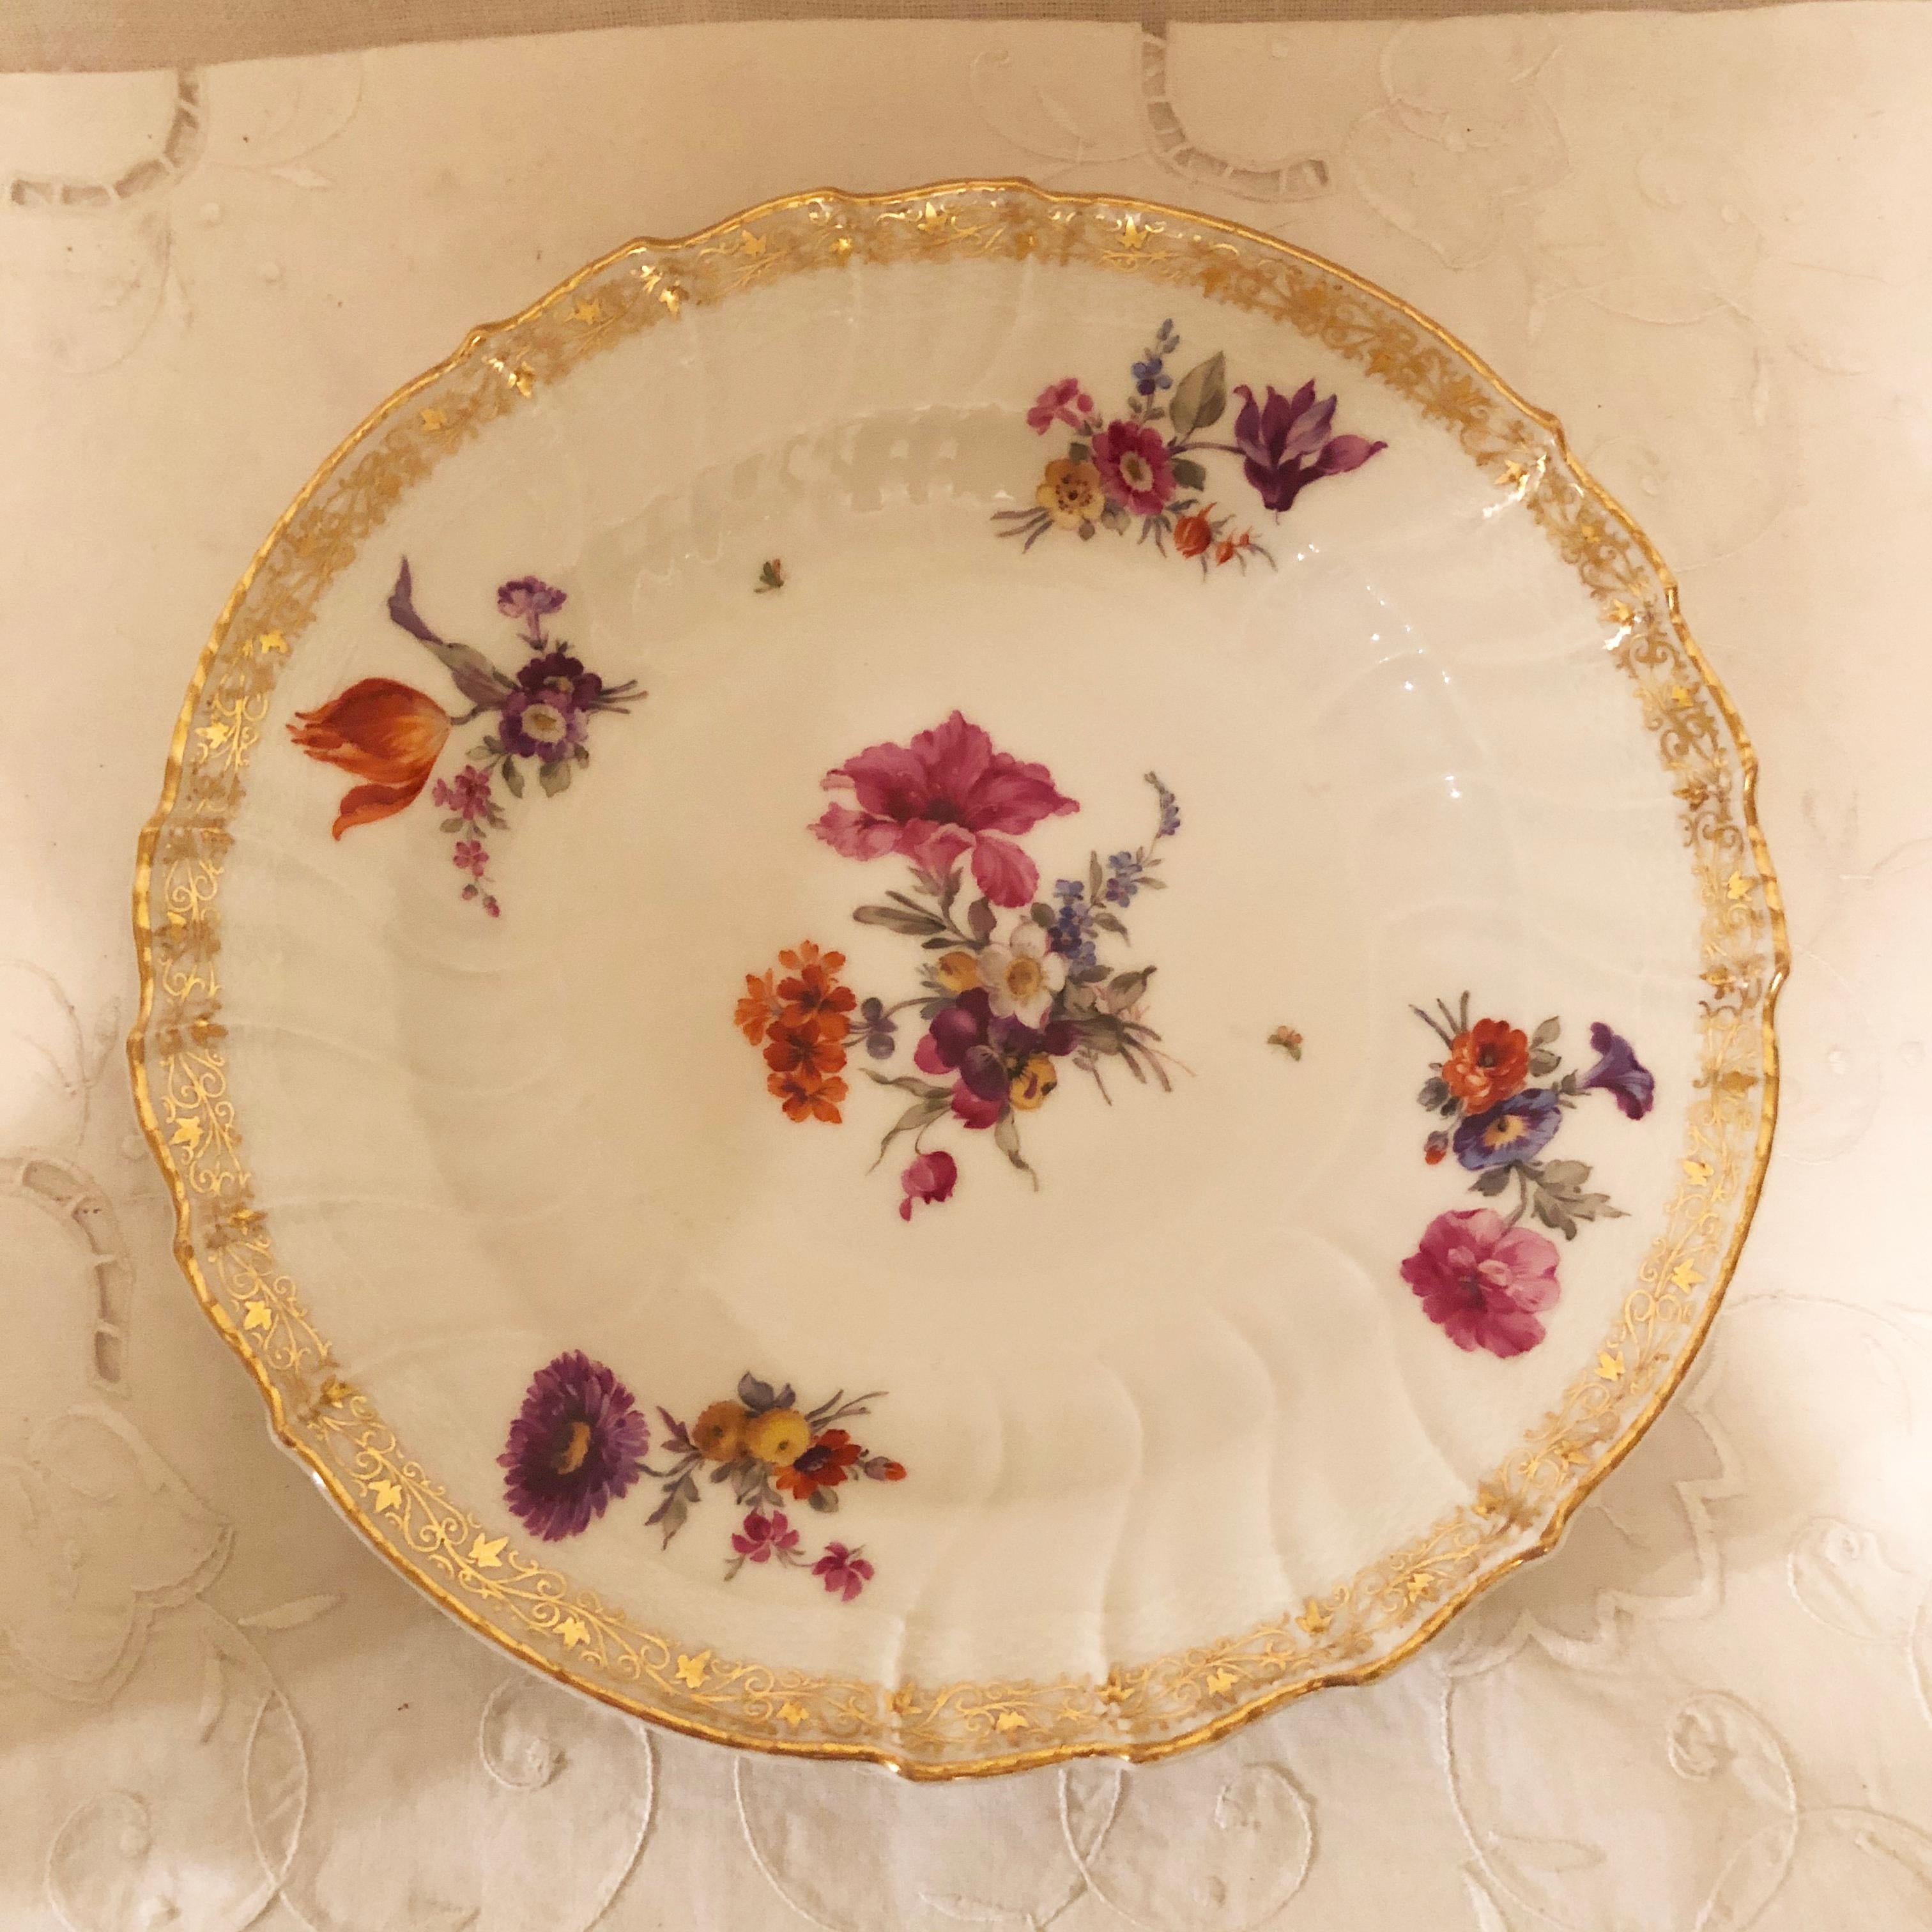 Set of twelve KPM dinner plates with different museum quality hand painted floral bouquets on each plate. KPM is also known as the Konigliche Porzellan-Manufaktur of Germany. They had very talented artists who did an outstanding job of painting on